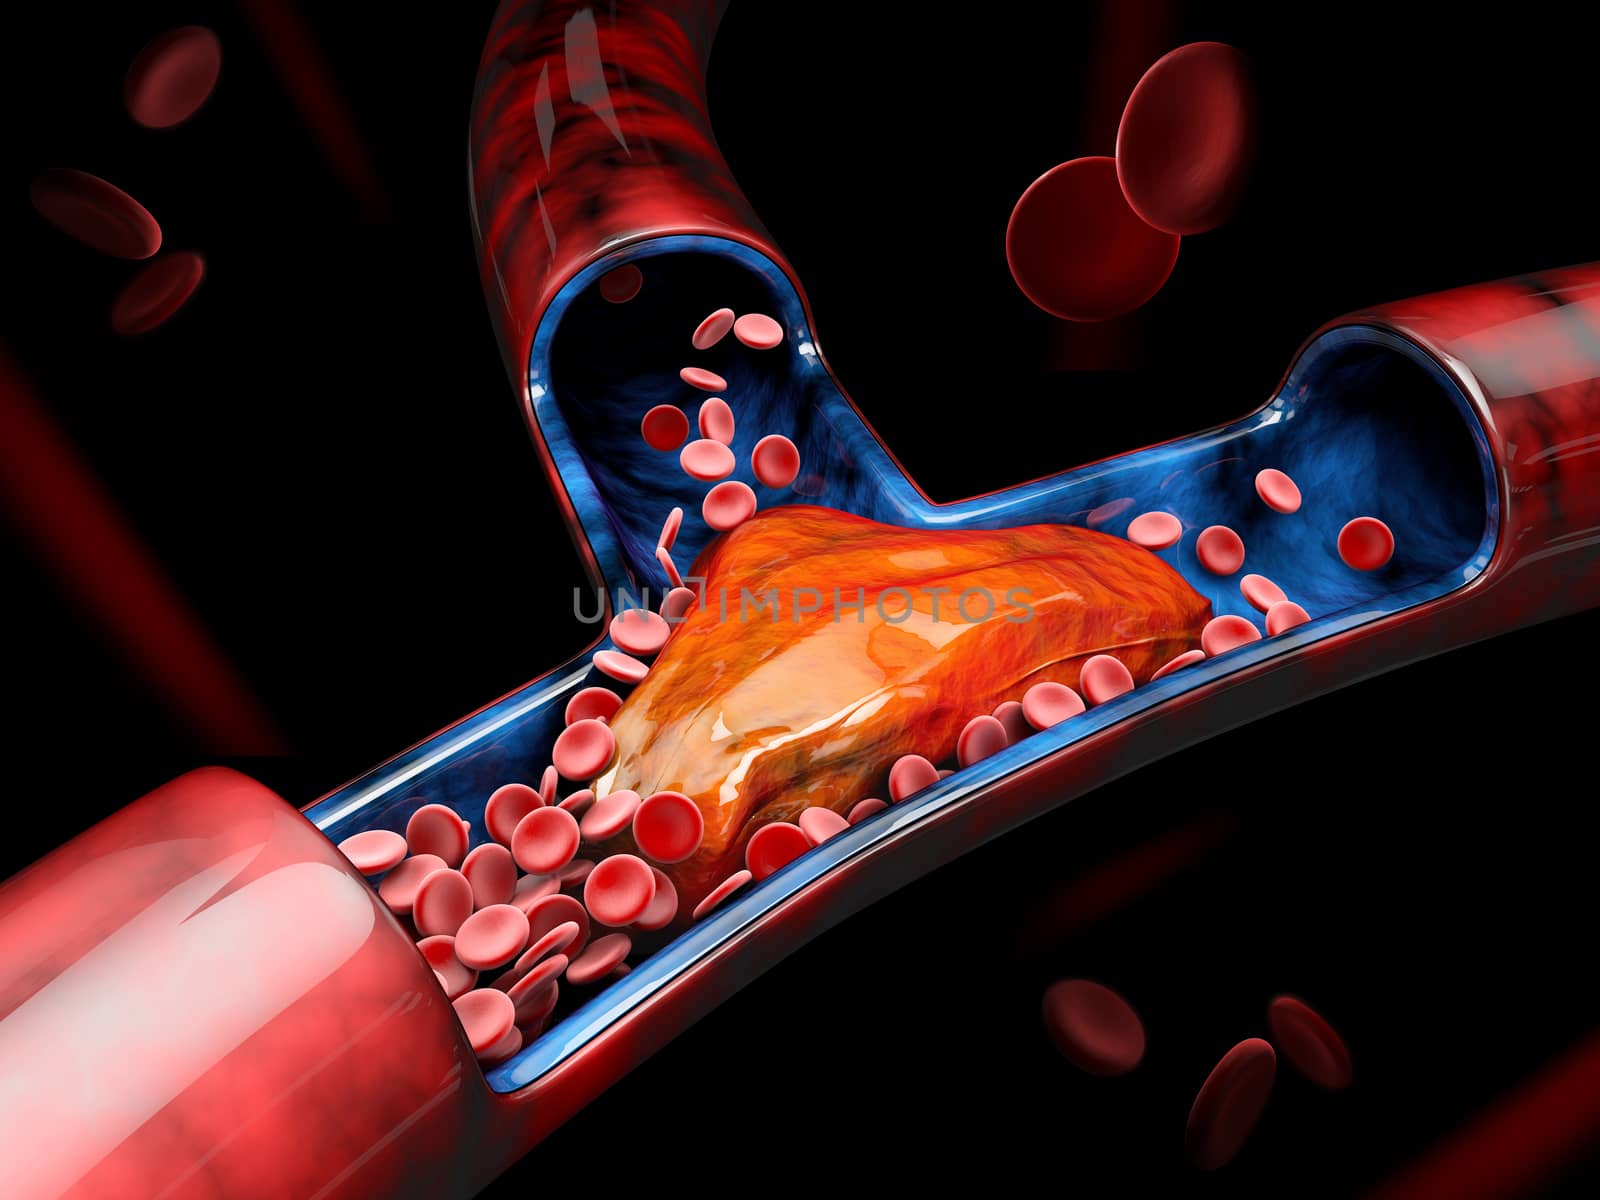 3d Illustration of Deep Vein Thrombosis or Blood Clots. Embolism by tussik